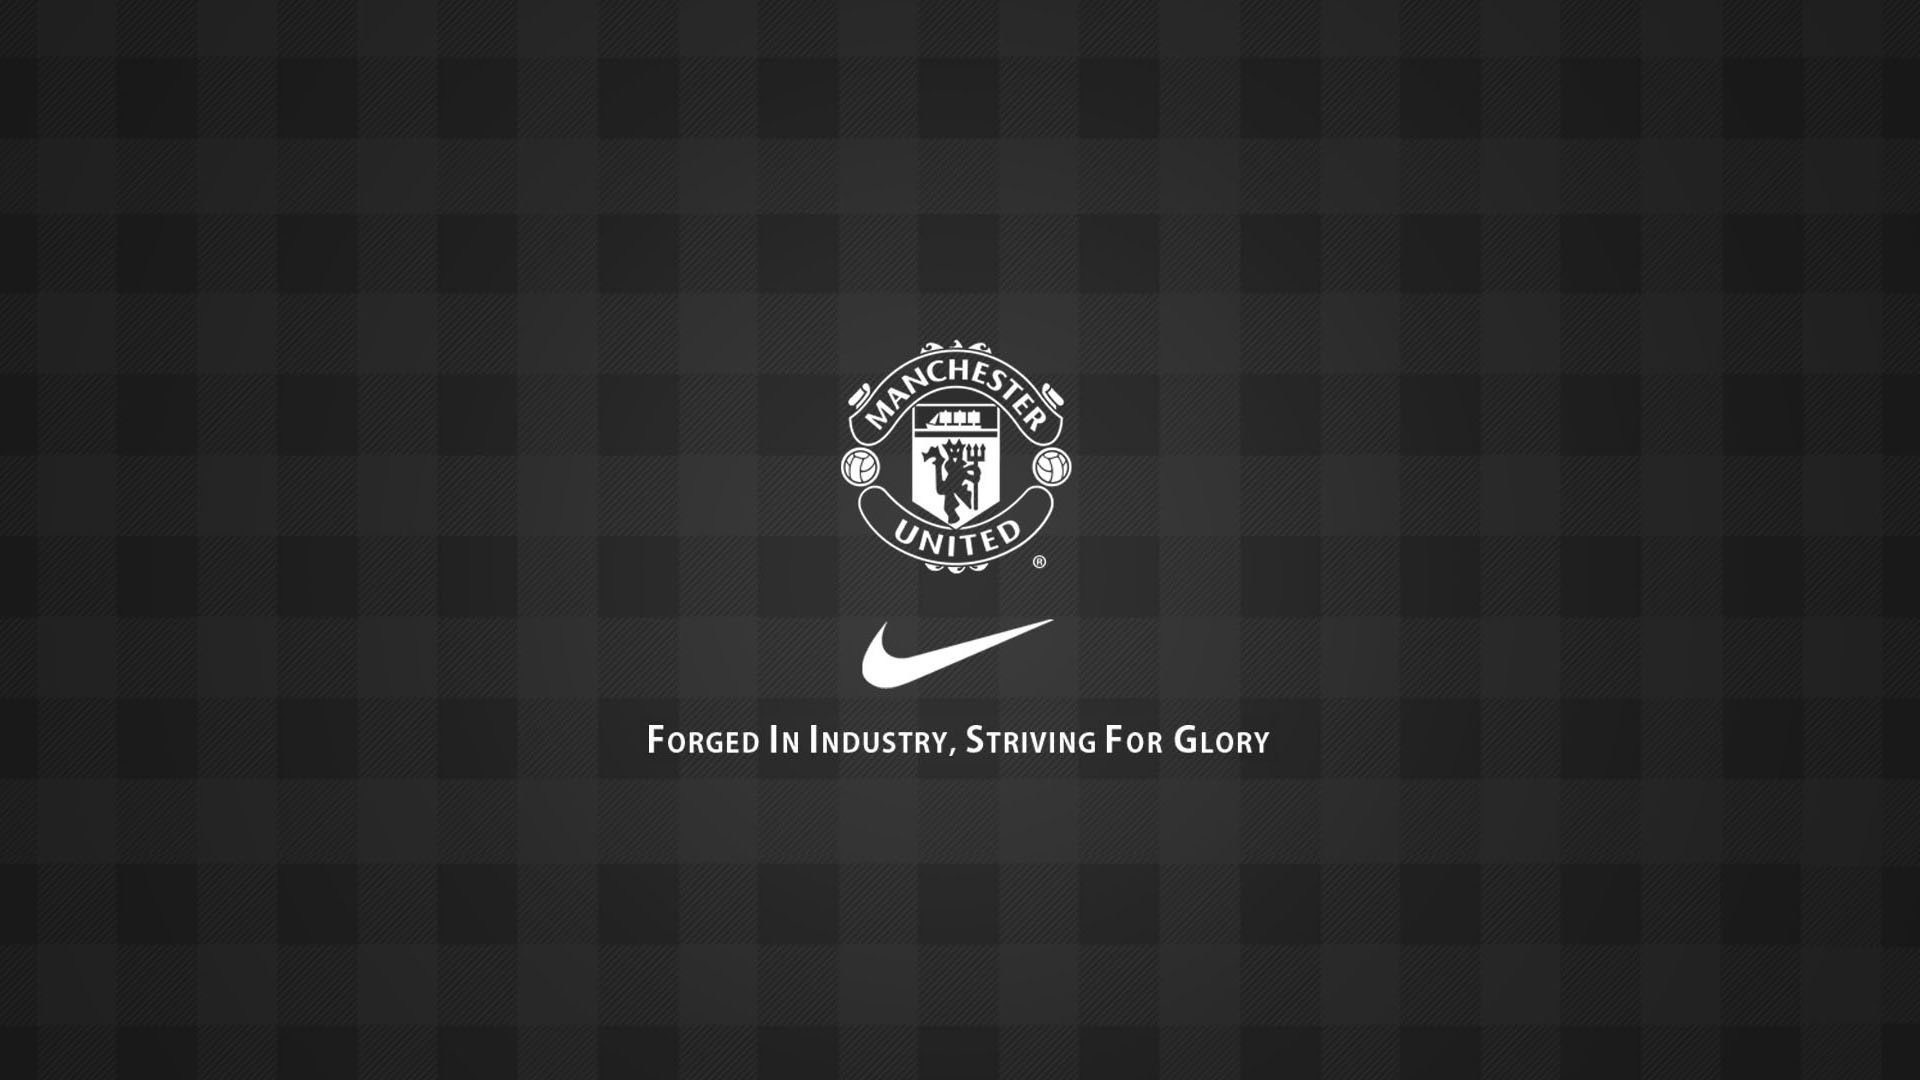 Download Wallpapers Manchester United 1920x1080